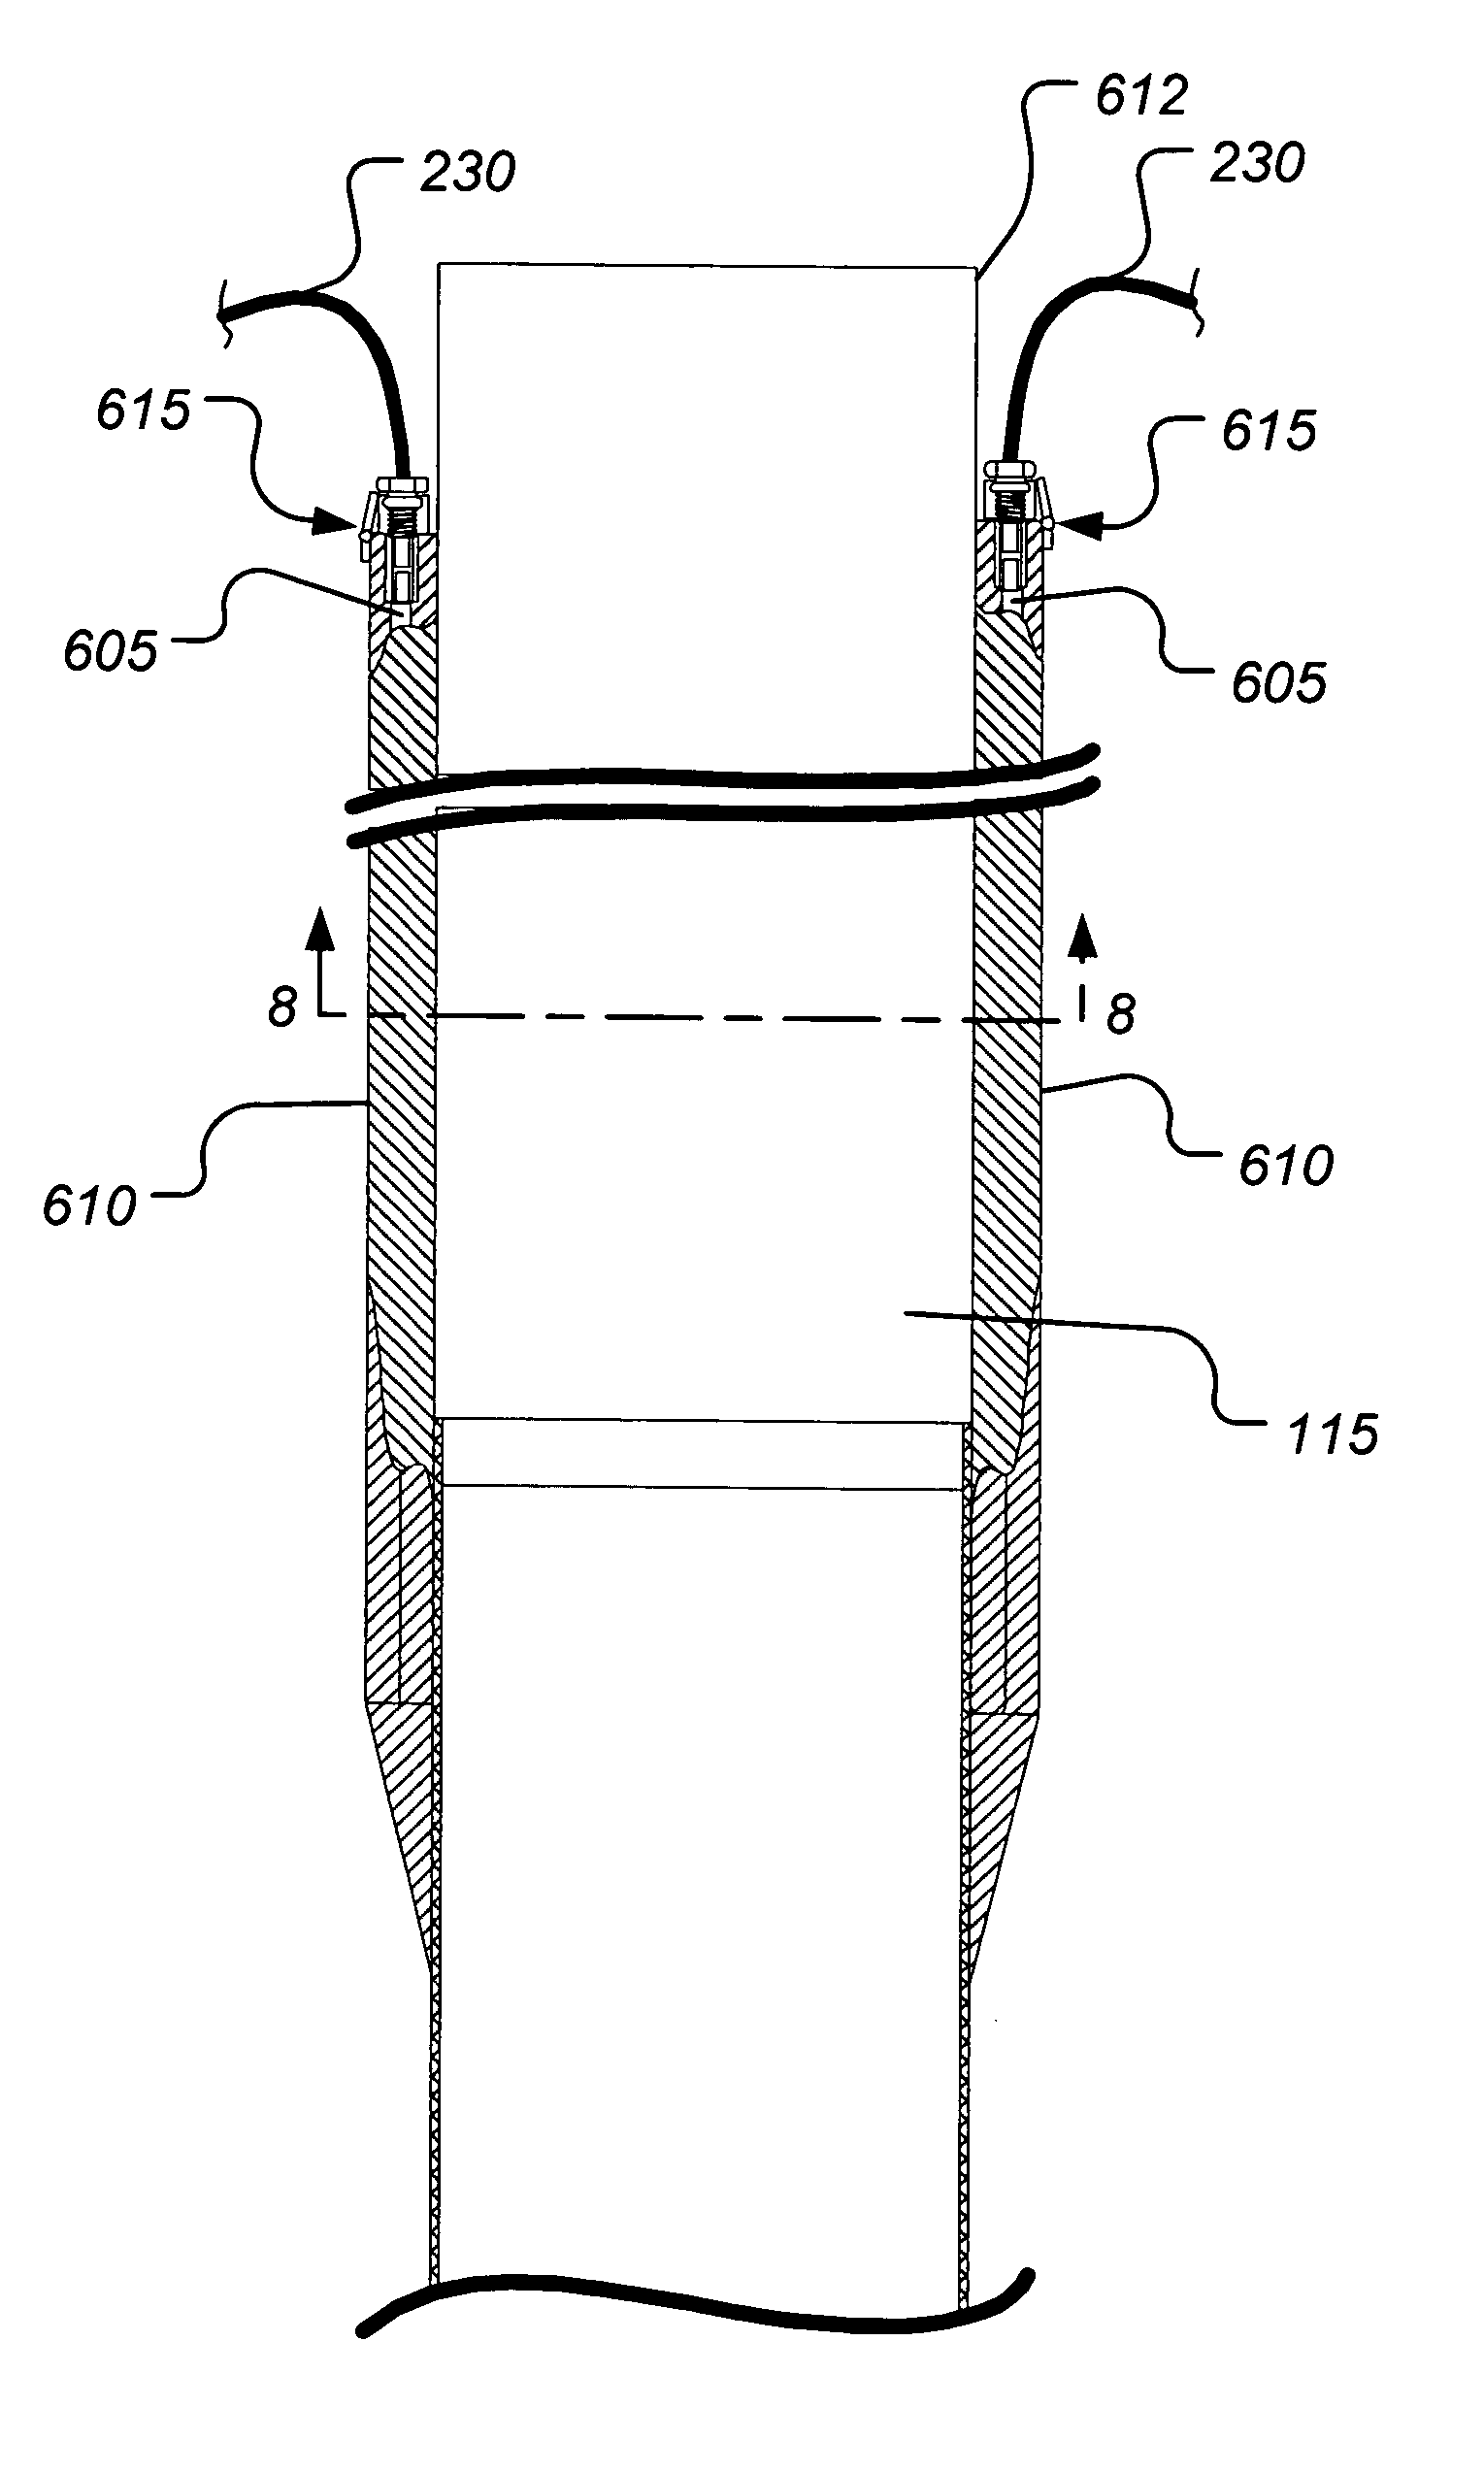 Thermally initiated venting system and method of using same